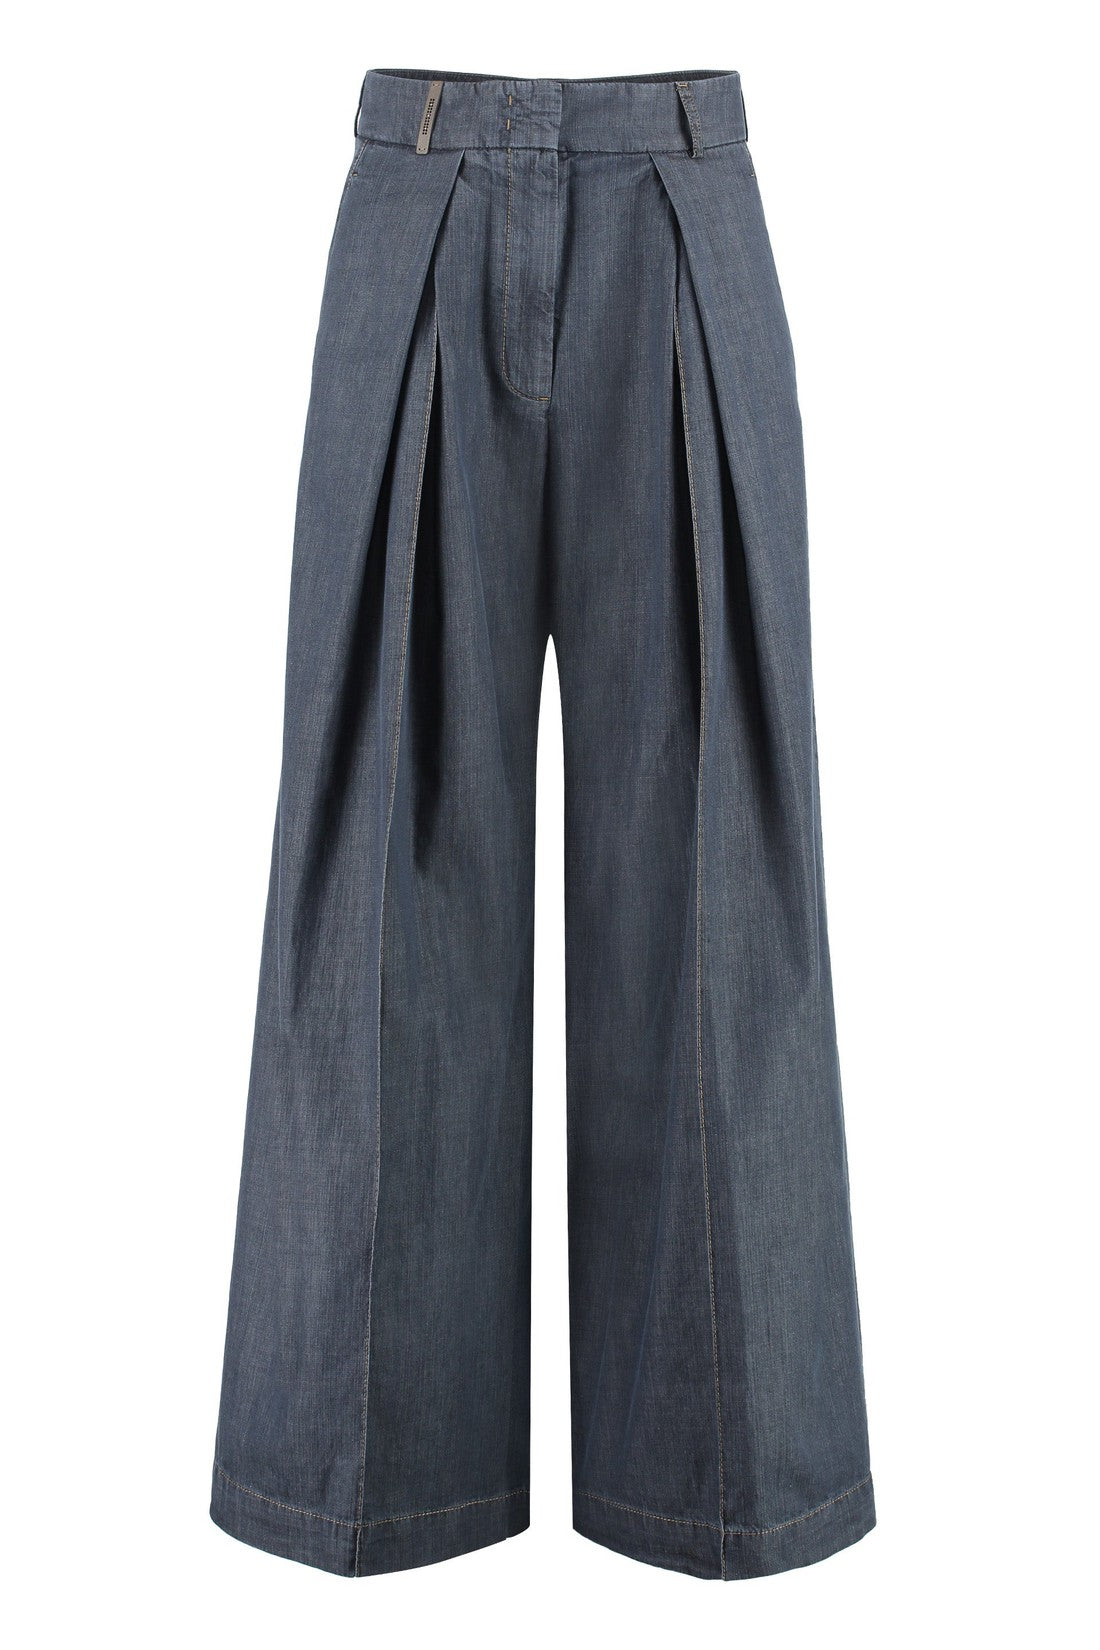 Peserico-OUTLET-SALE-Cotton baggy trousers-ARCHIVIST